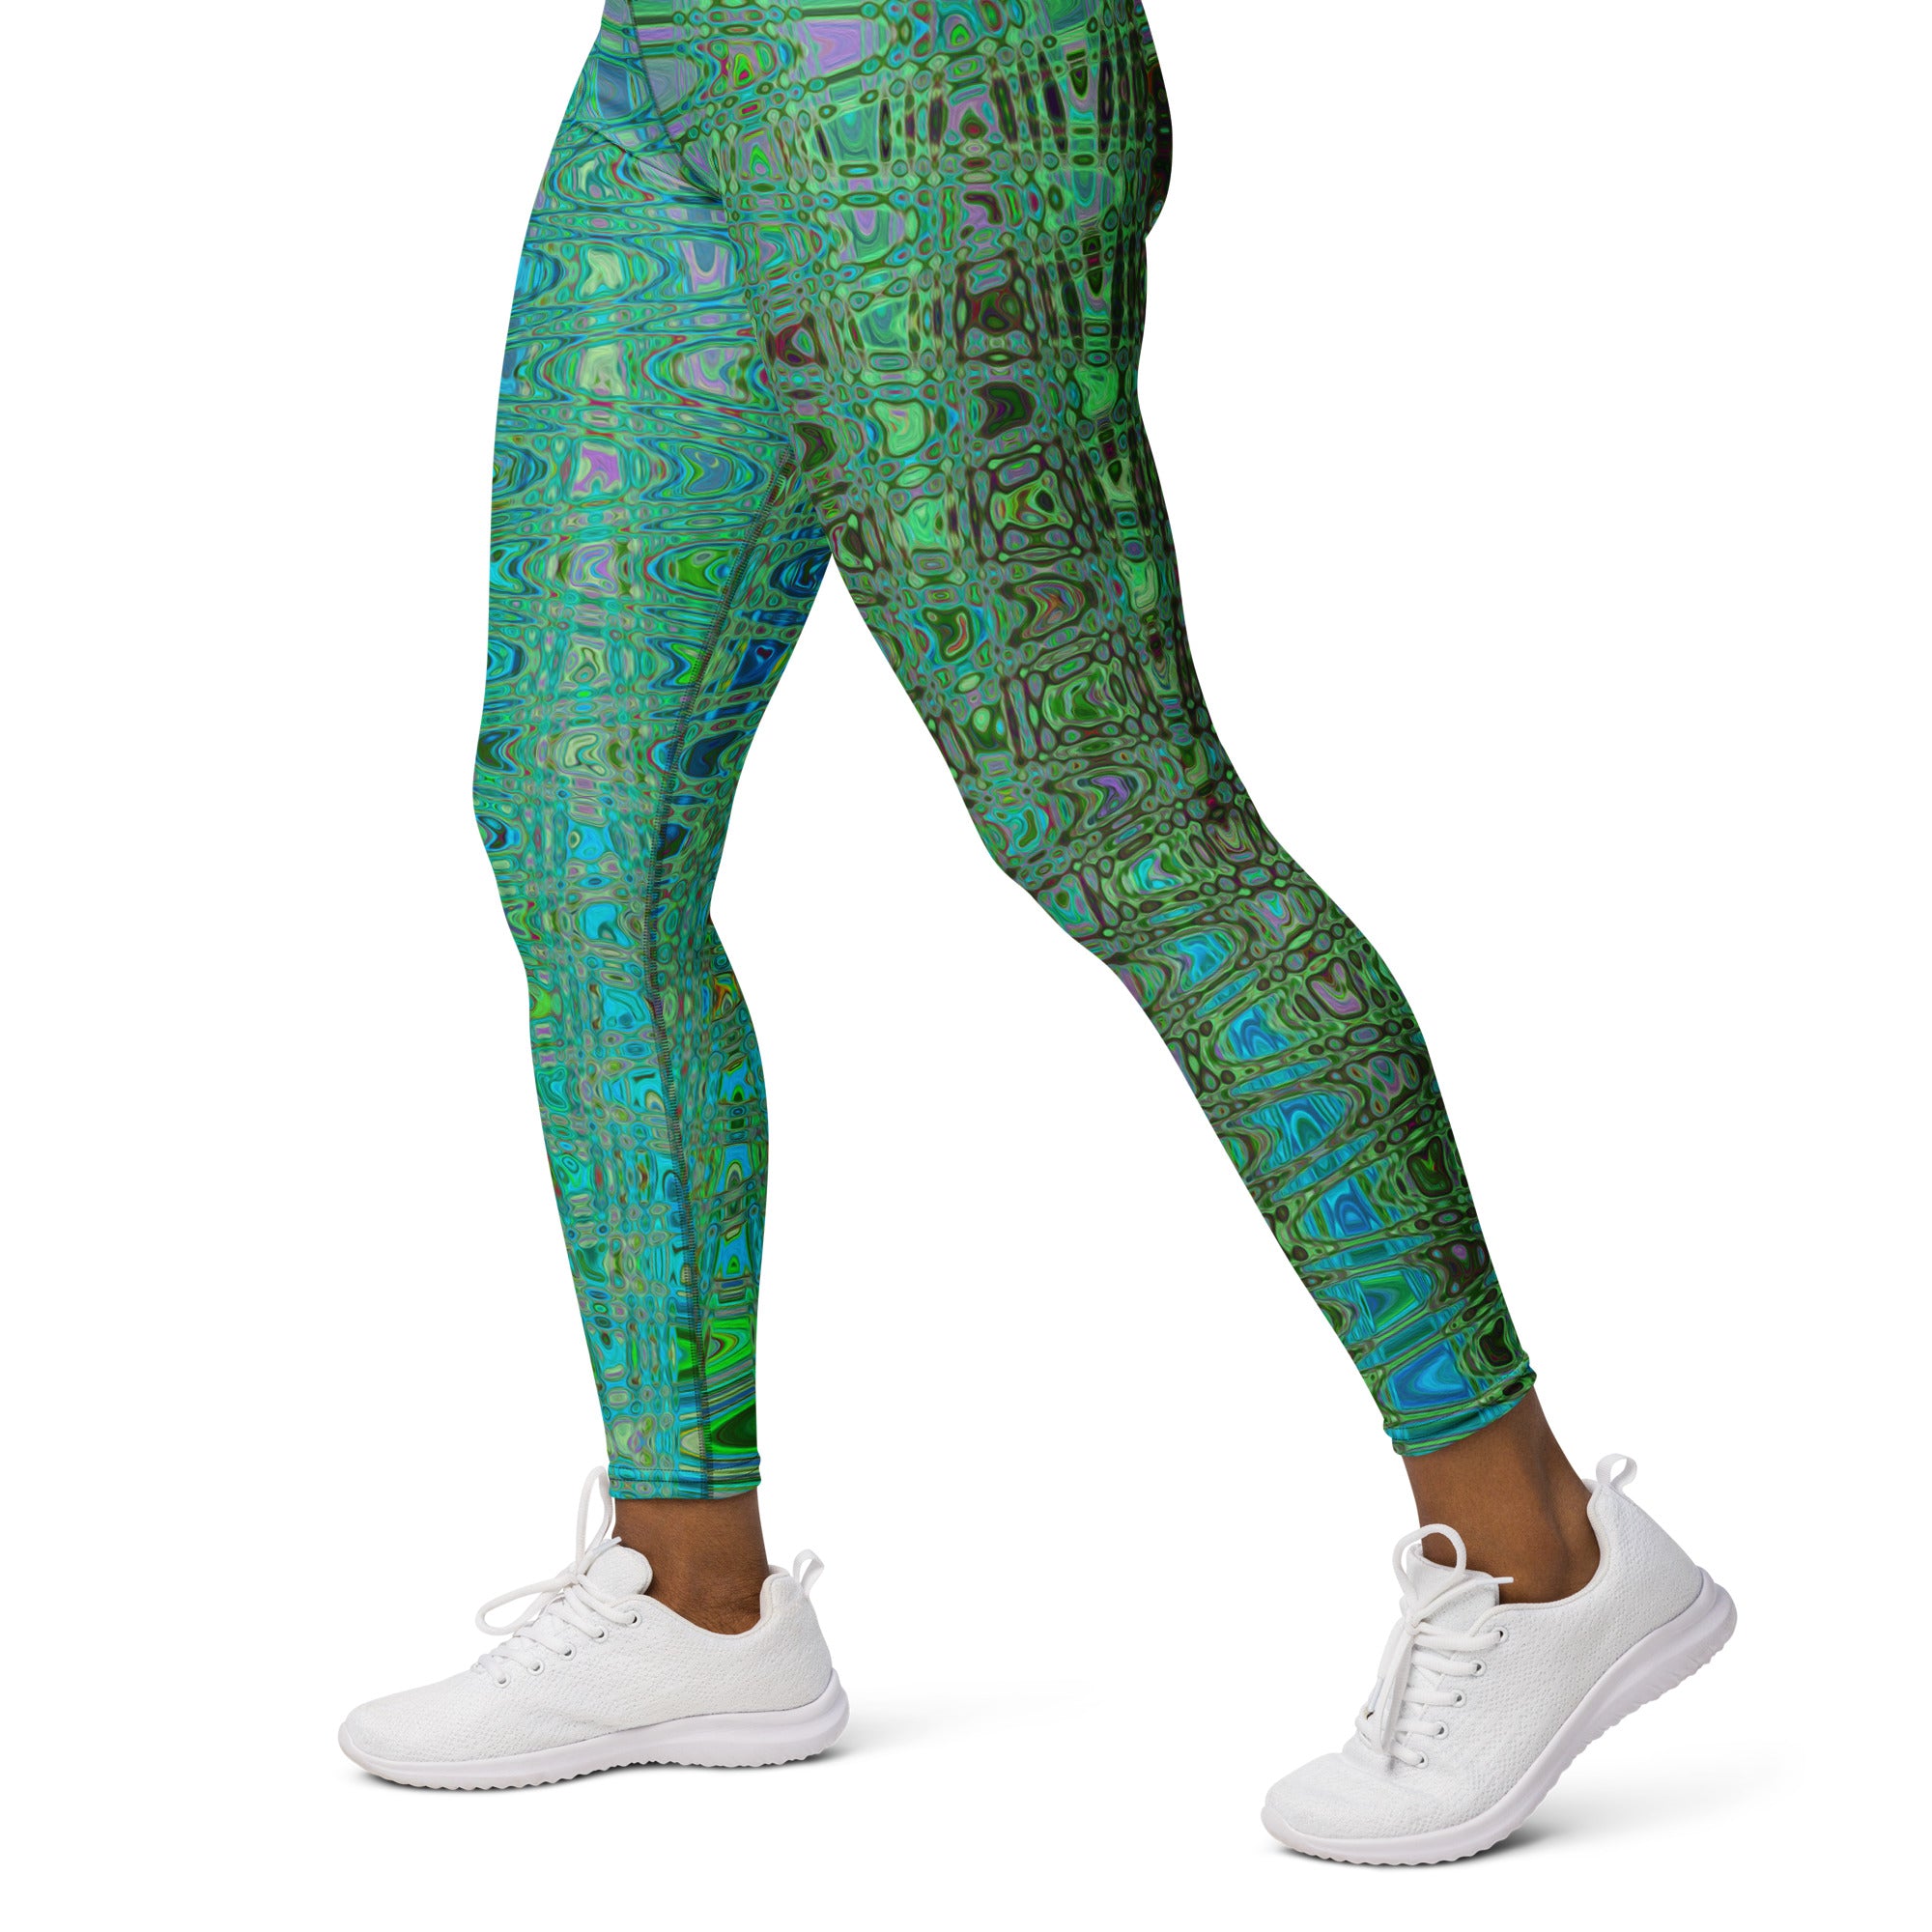 Yoga Leggings for Women | Abstract Green and Blue Retro Boomerang Waves